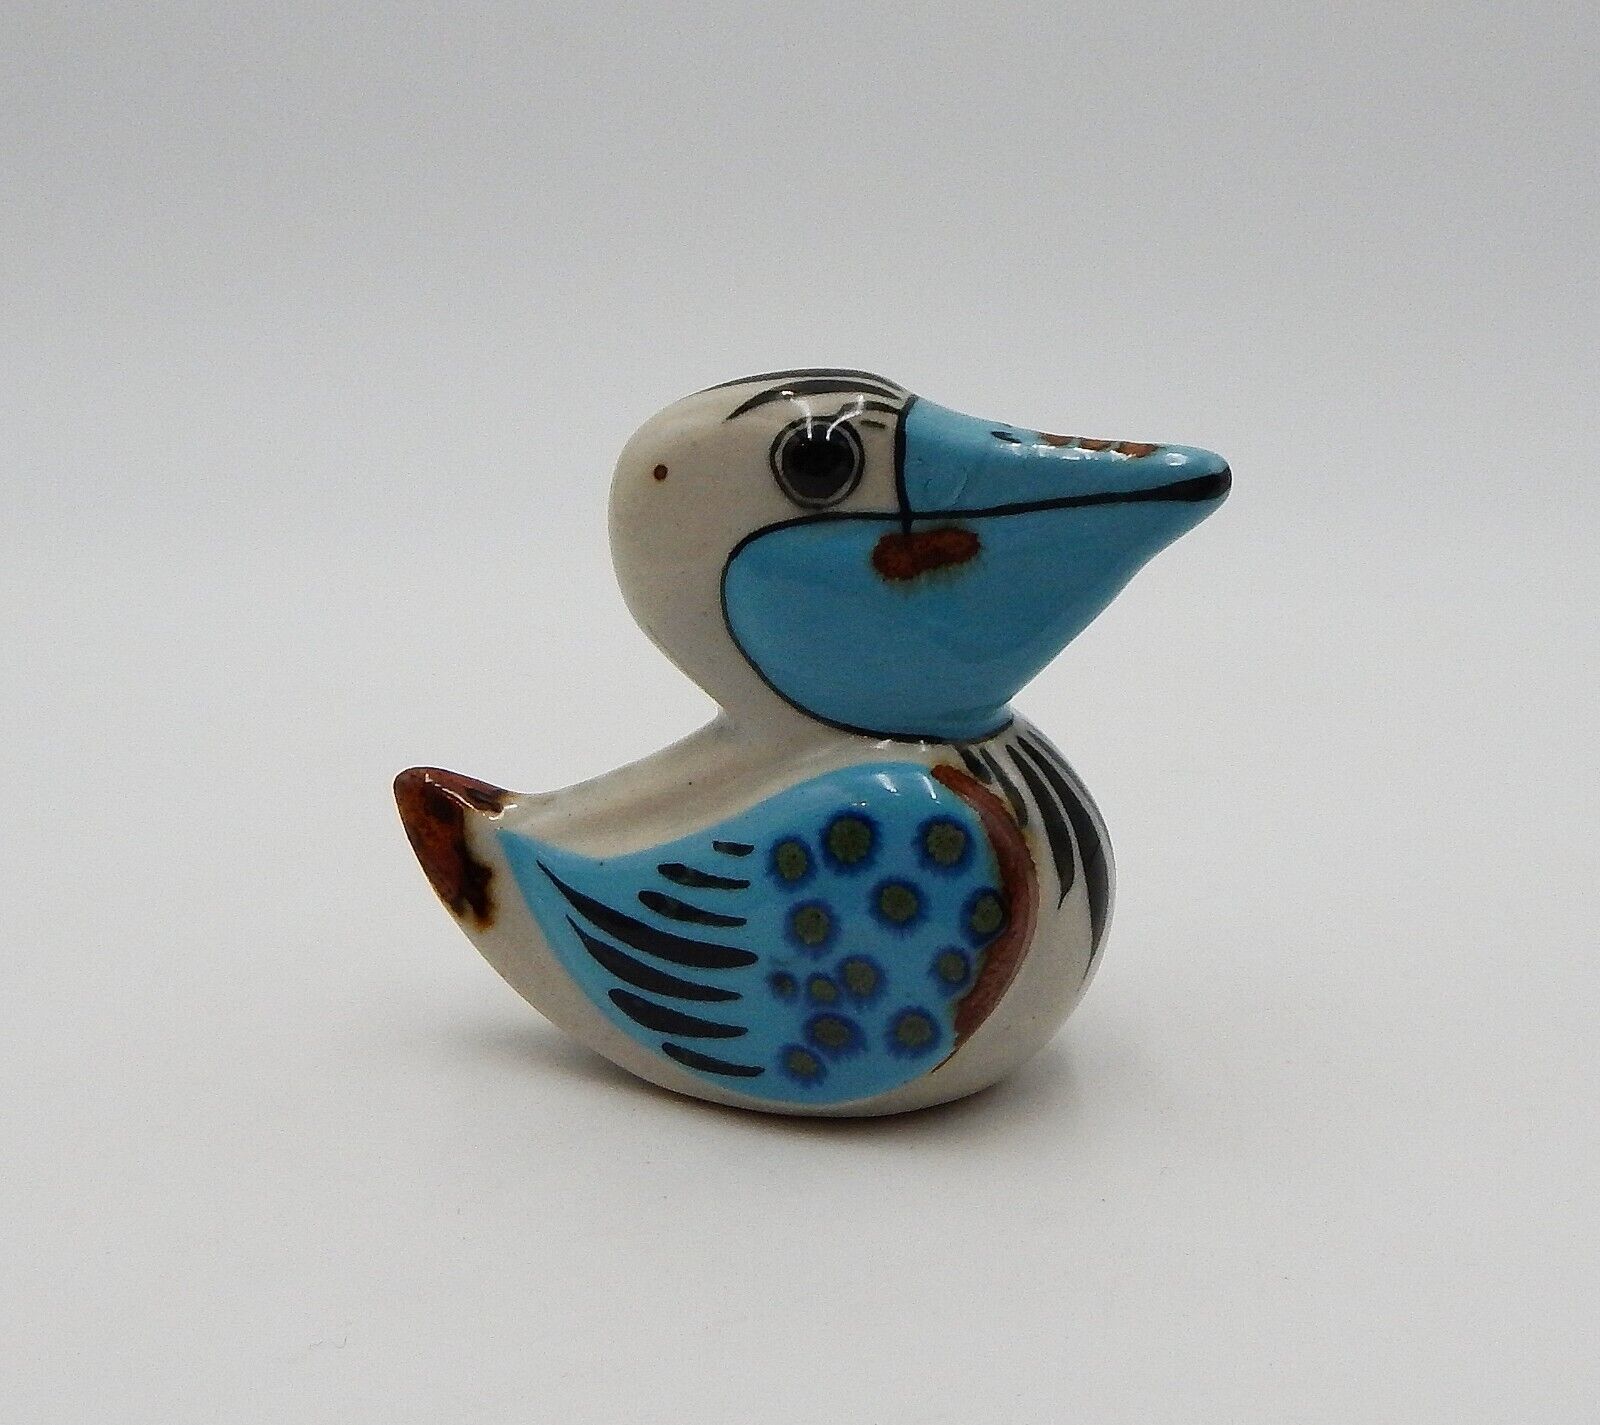 Primary image for Ken Edwards Pottery Tonala Blue Pelican Figurine Hand Painted Signed